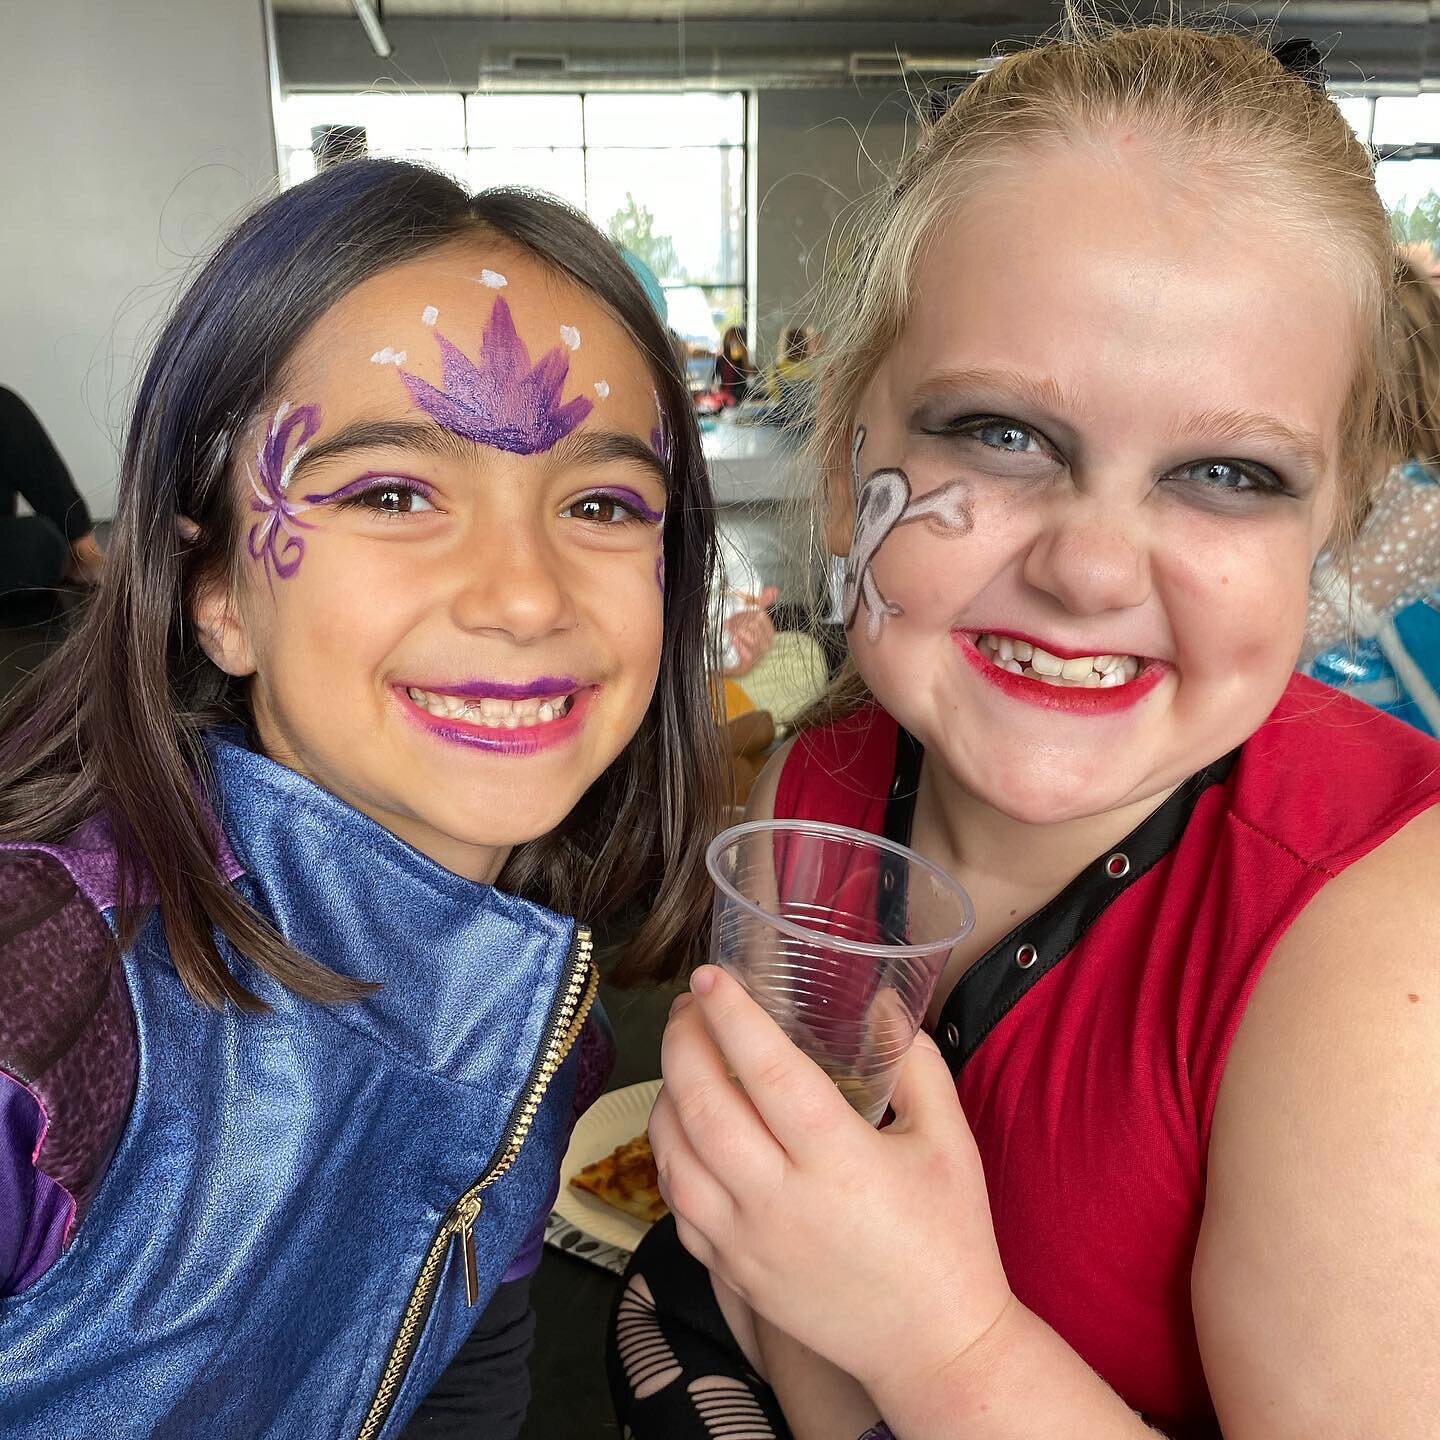 That&rsquo;s a wrap on Halloween🎃👻🧙&zwj;♀️&hellip;what can we say, our Spook-EDC Halloween Bash was a HUGE hit!!!! 🧡🖤🧡

From dancing to face painting, games, tattoos, crafts and pizza we had the most AMAZING time with these kiddos!!! 

The best